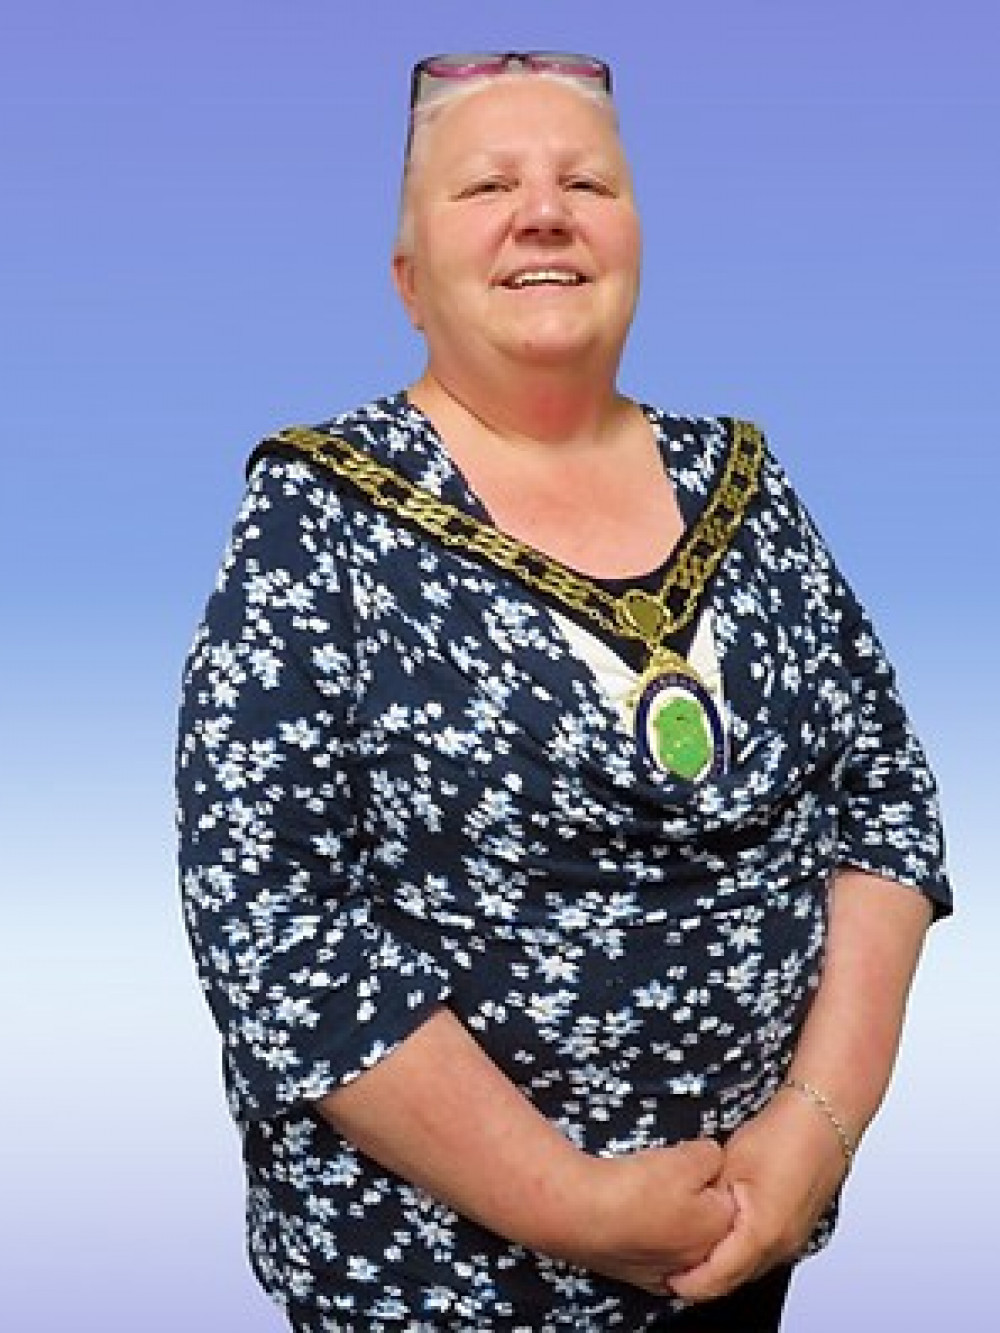 Sally-Anne Wadsworth taking on her new role as the Mayor of Oakham (image courtesy of Martin Brookes)